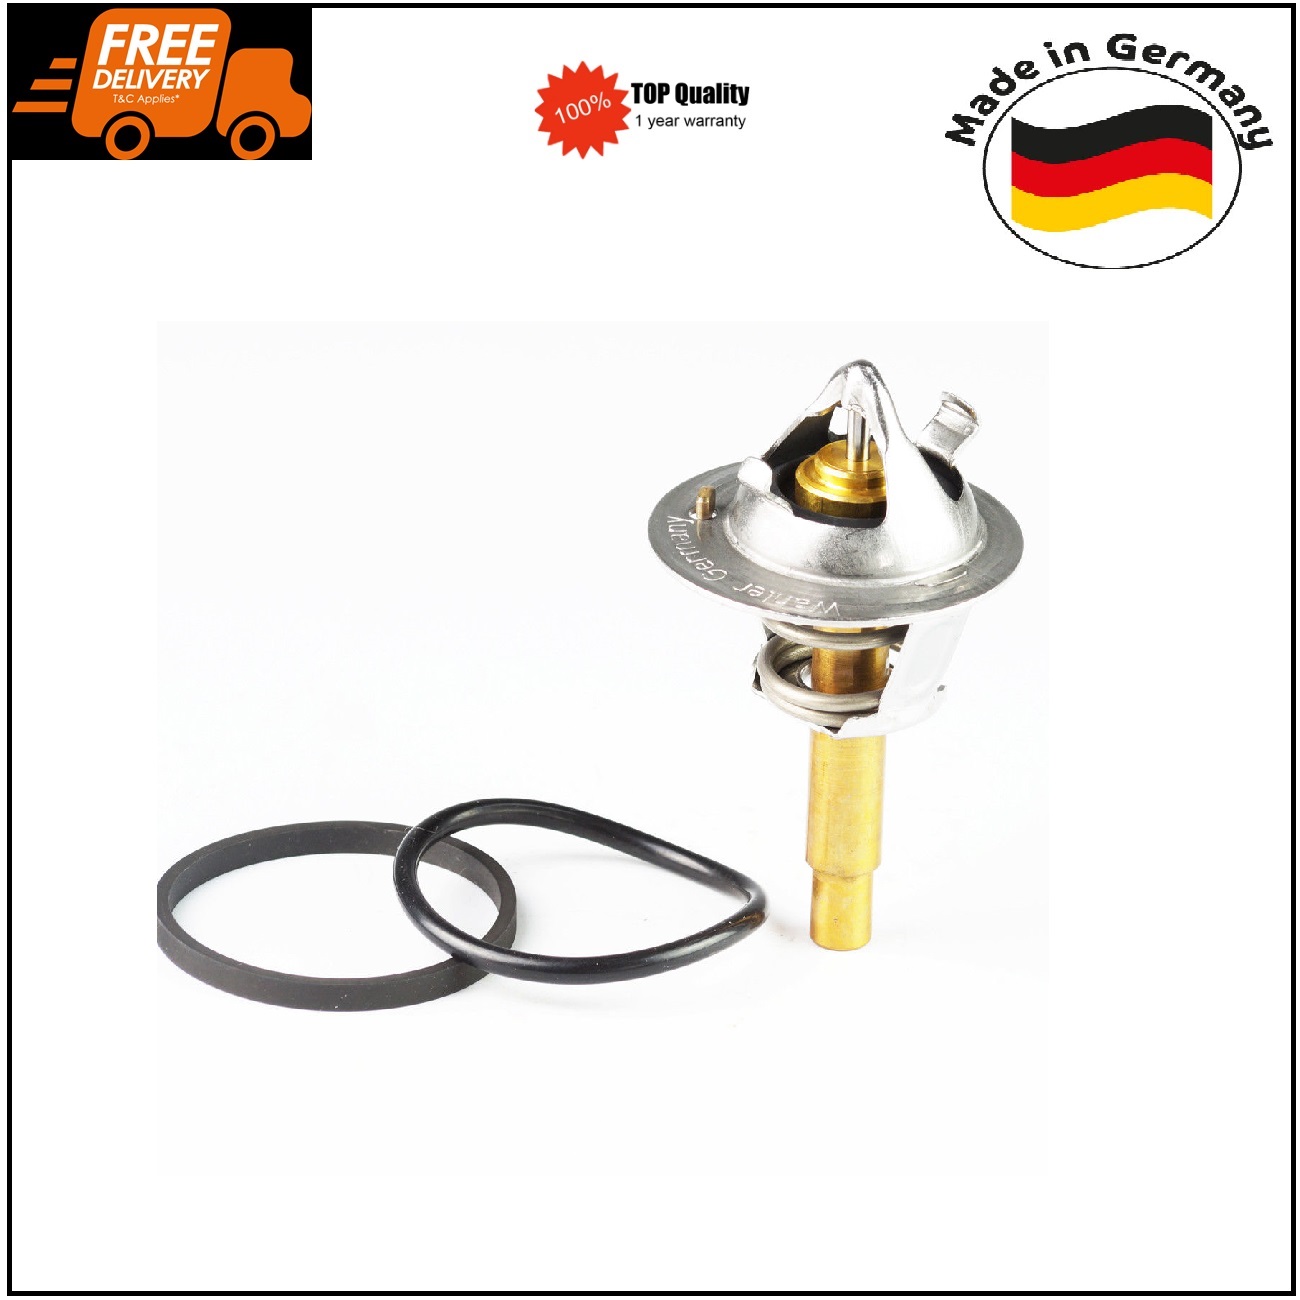 Thermostat for Mercedes A209 W203 W204 CL203 W211 R171 S204 2712030575